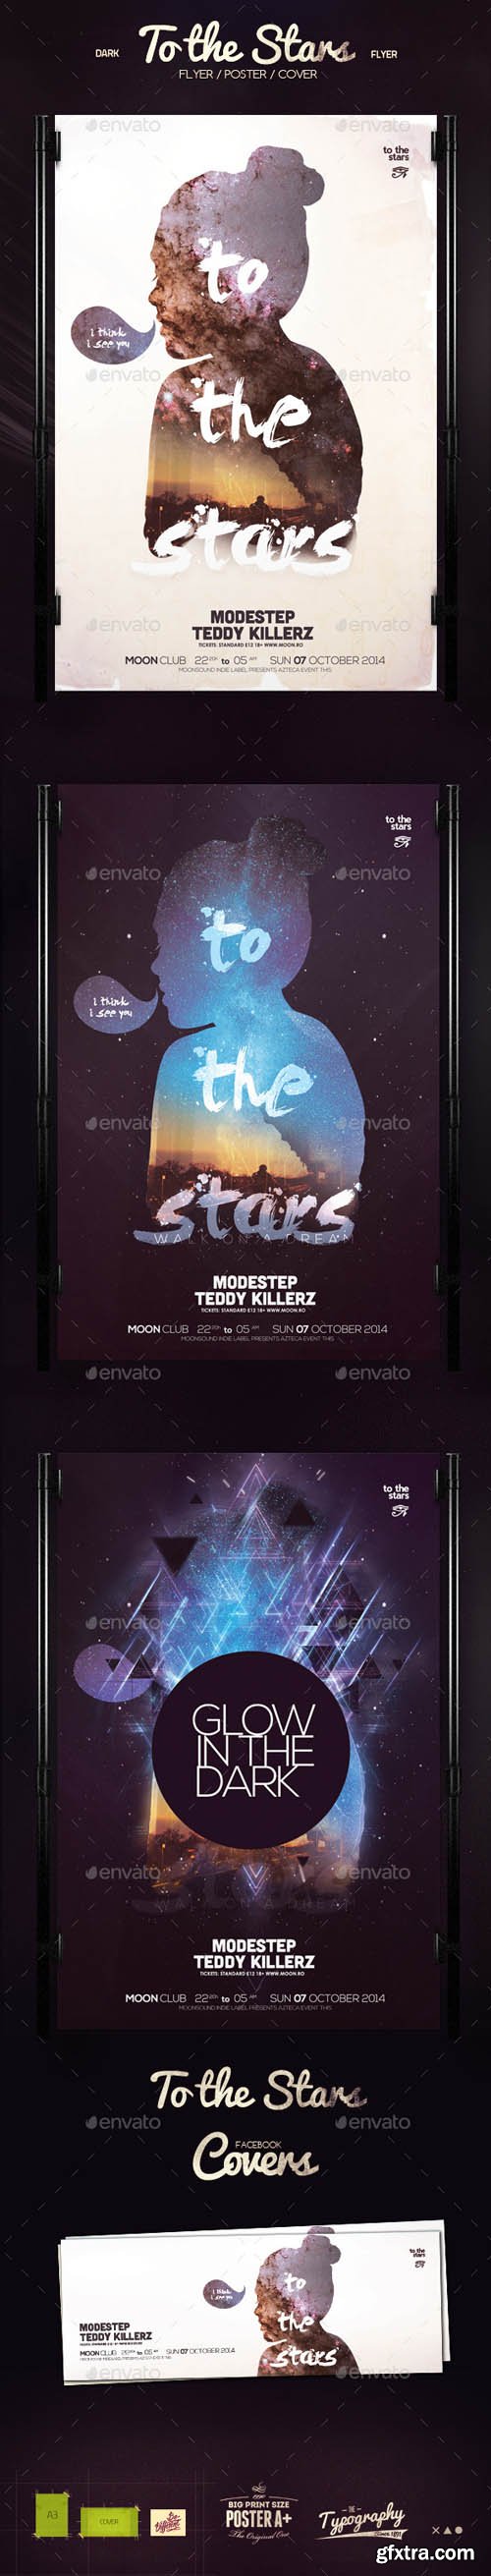 GR - To the Stars Poster 9270692